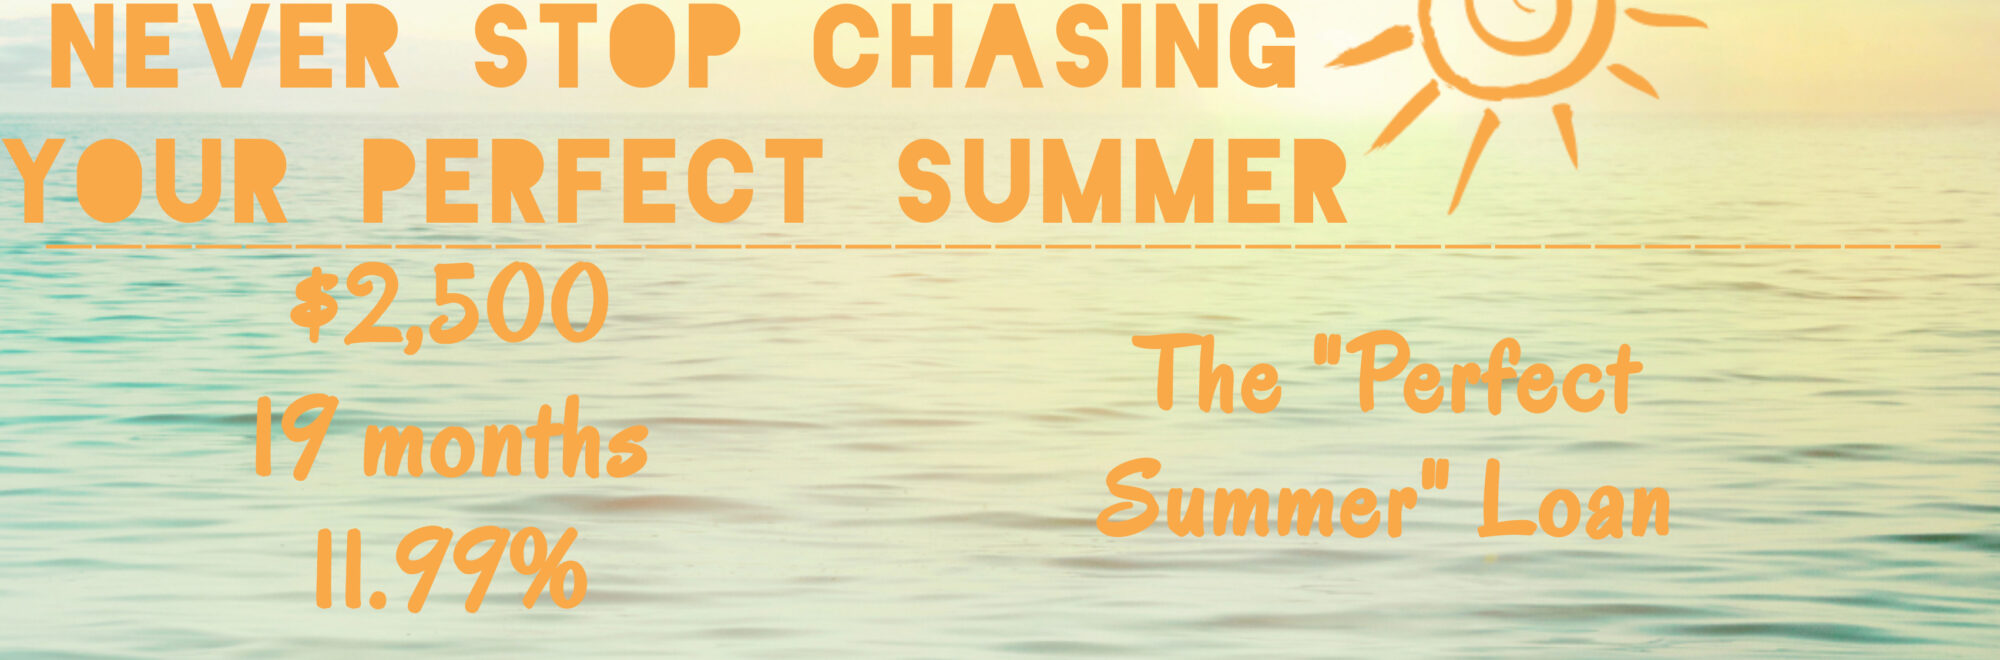 The “Perfect Summer” Loan